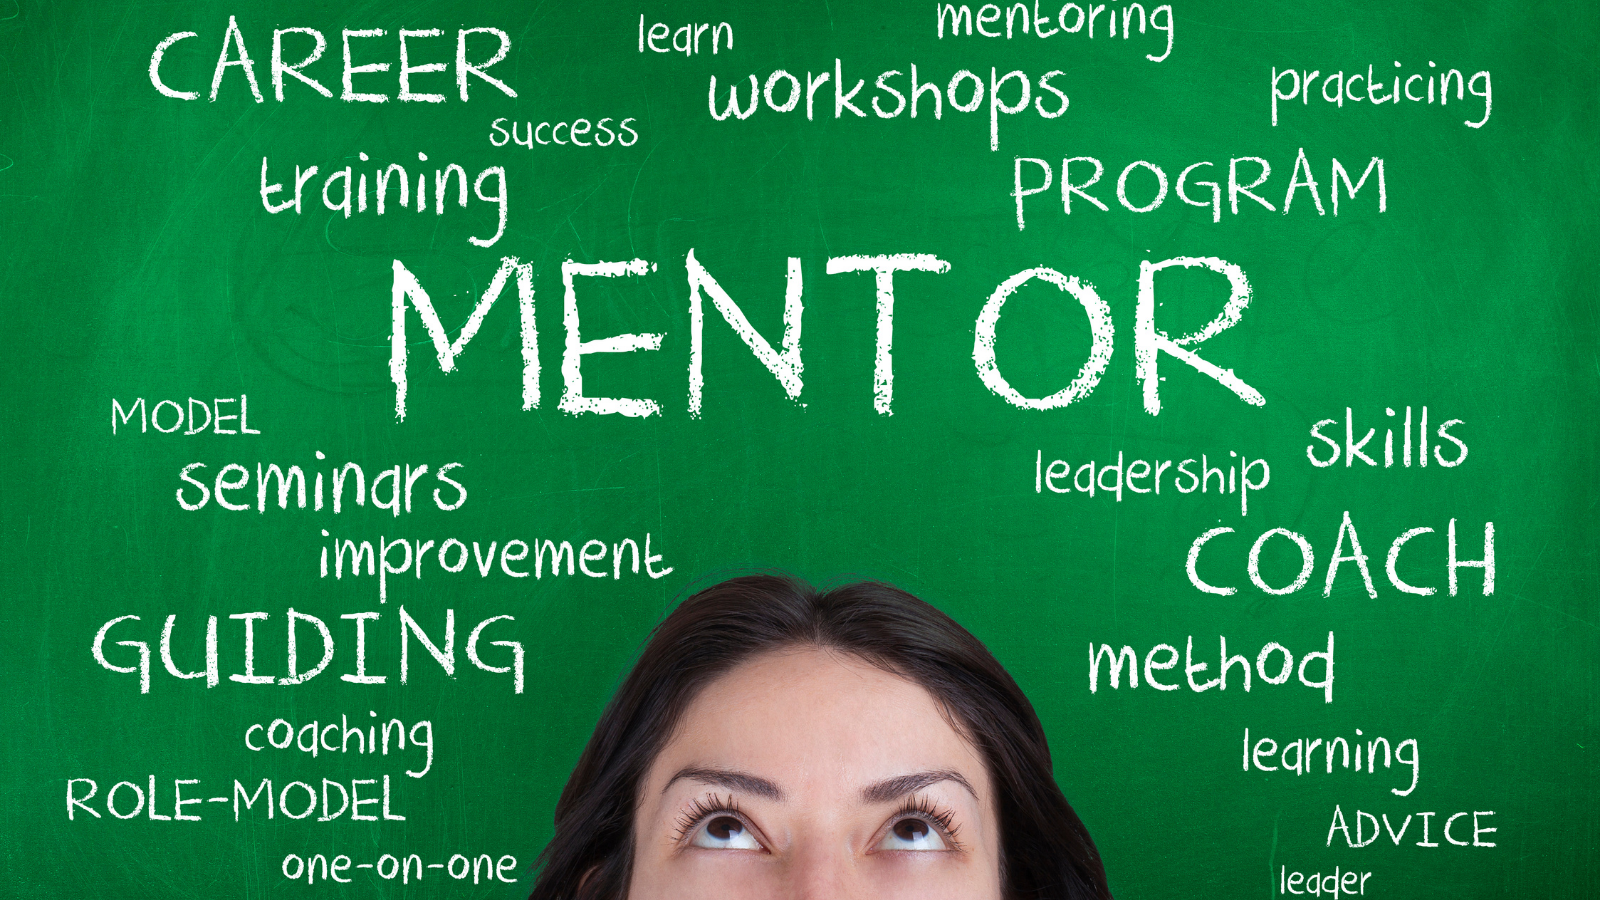 How important mentoring is in the workplace